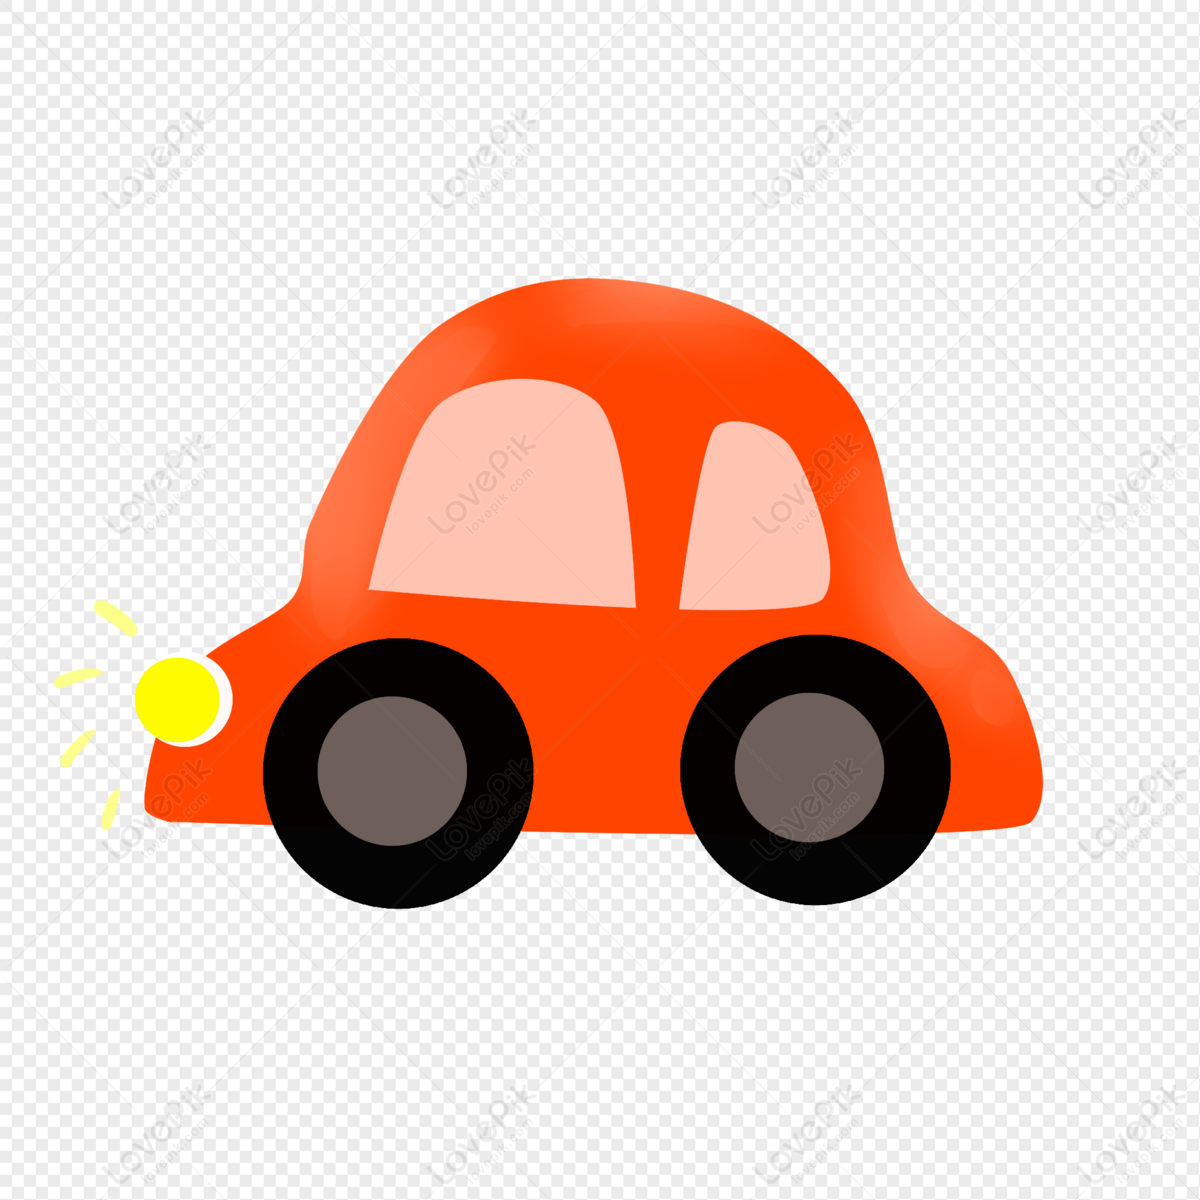 Cartoon Car PNG Image And Clipart Image For Free Download - Lovepik |  401266018